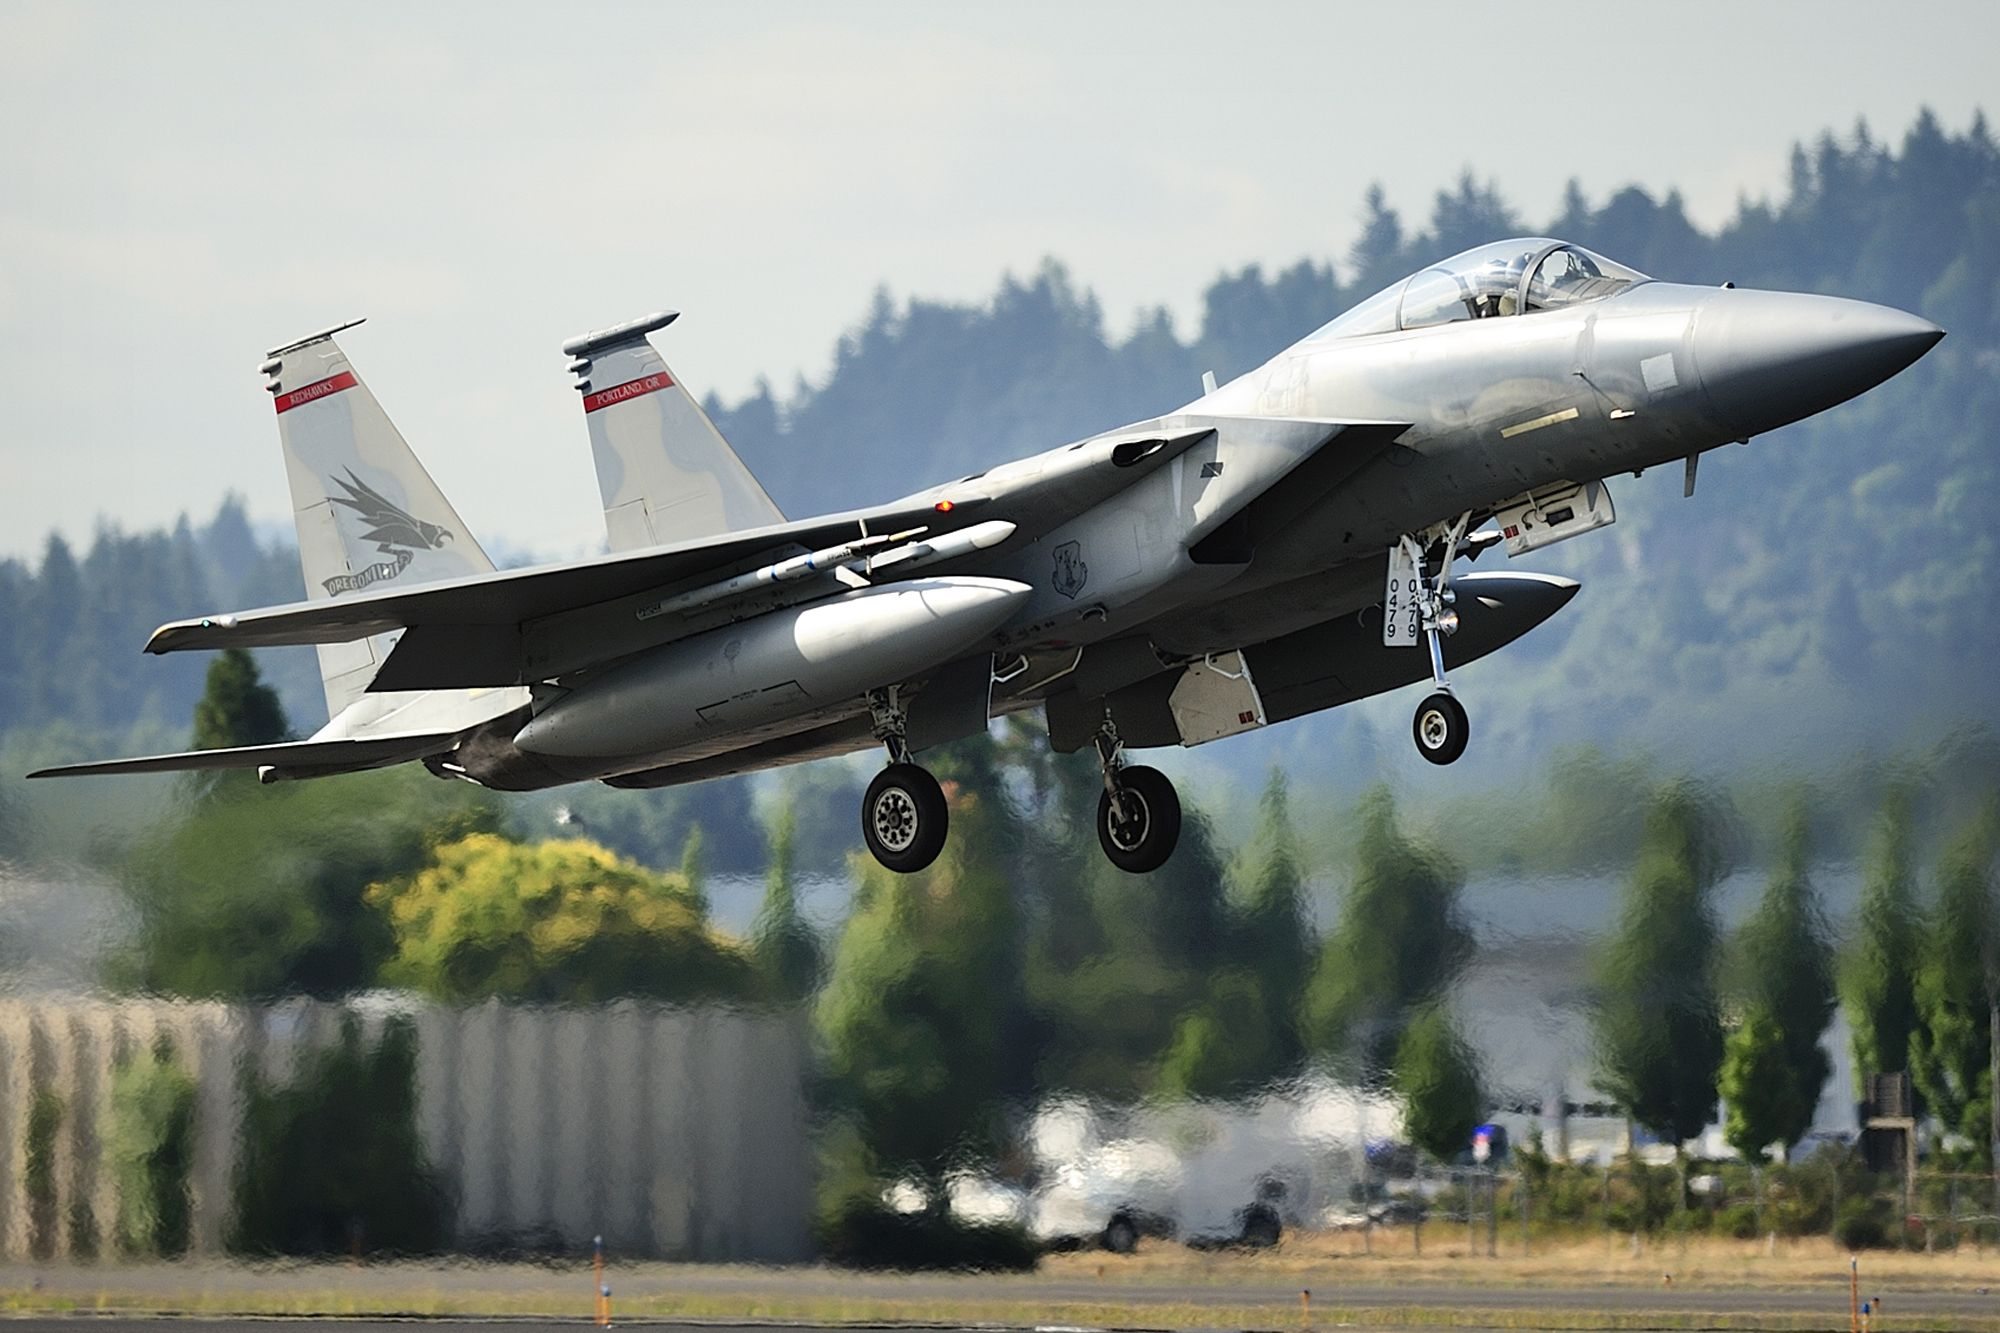 F-15 C model single seat jet fighters with the Oregon Air National Guard take off from Portland International Airport.